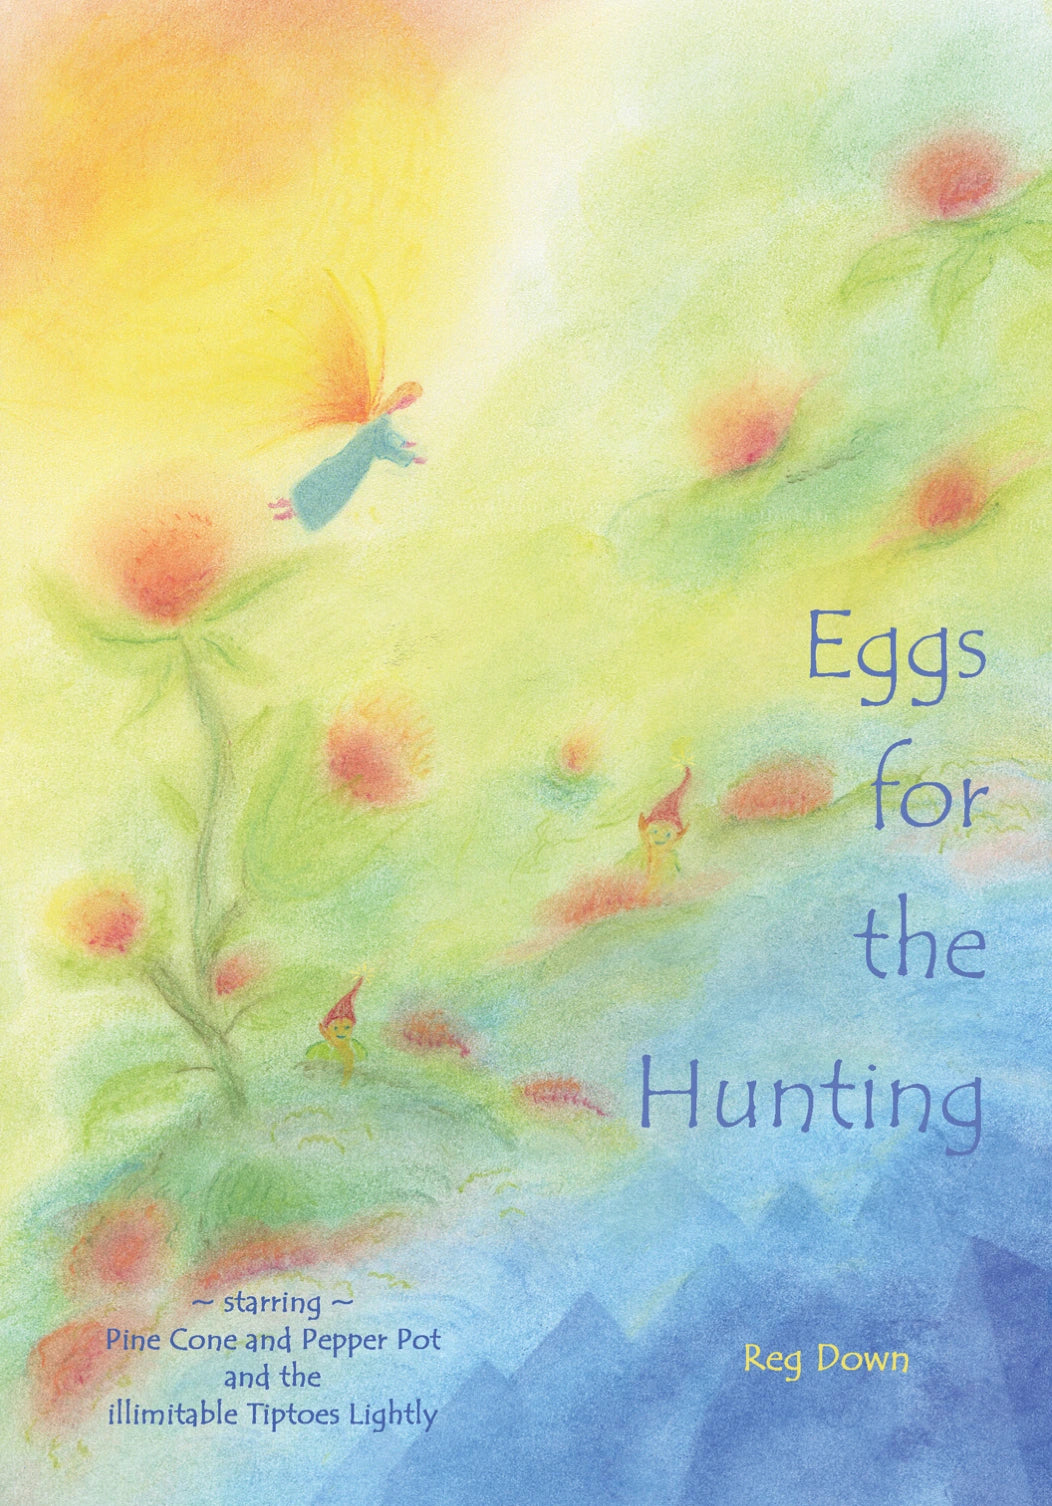 Easter Tale and Tales of Spring for Kids: Eggs for the Hunting by Reg Down - Alder & Alouette